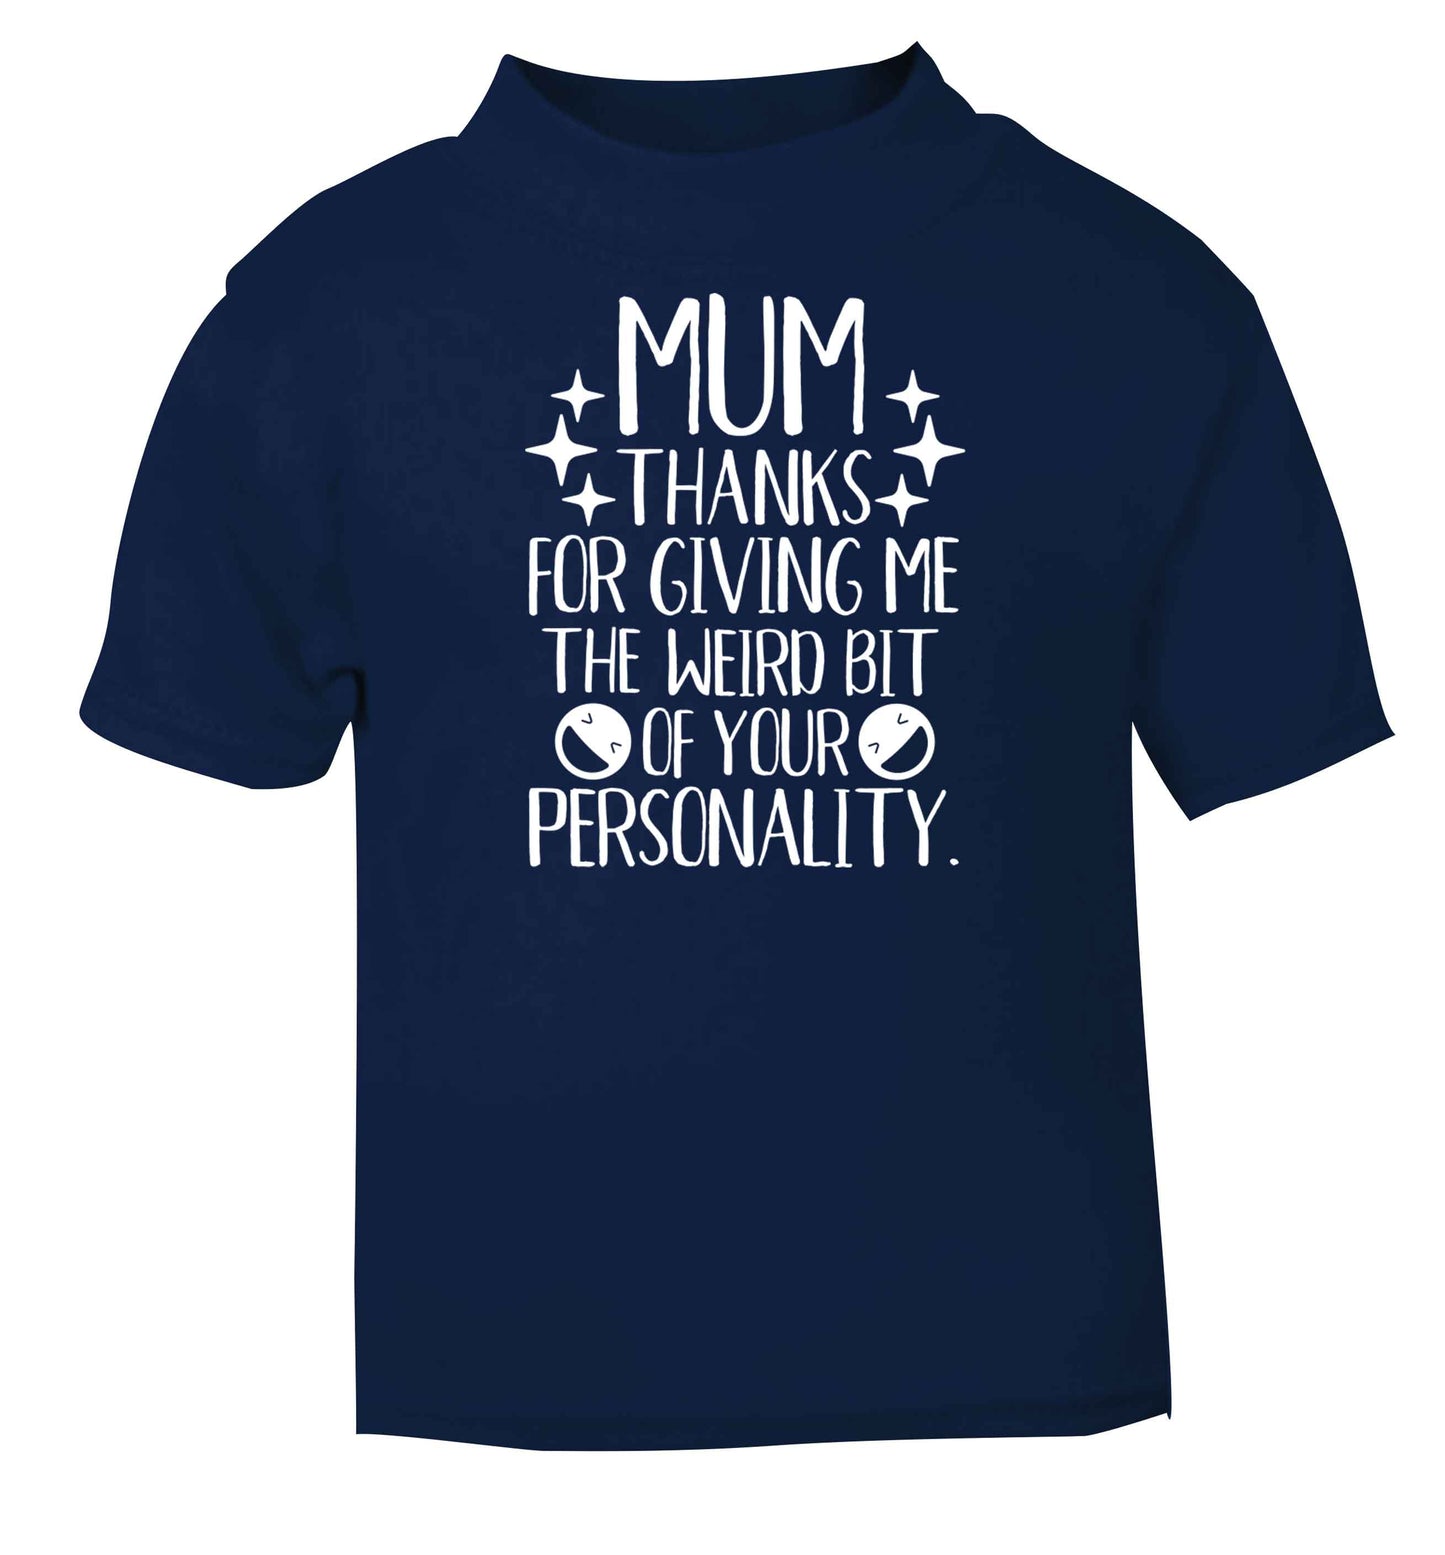 Mum thanks for giving me the weird bit of your personality navy baby toddler Tshirt 2 Years